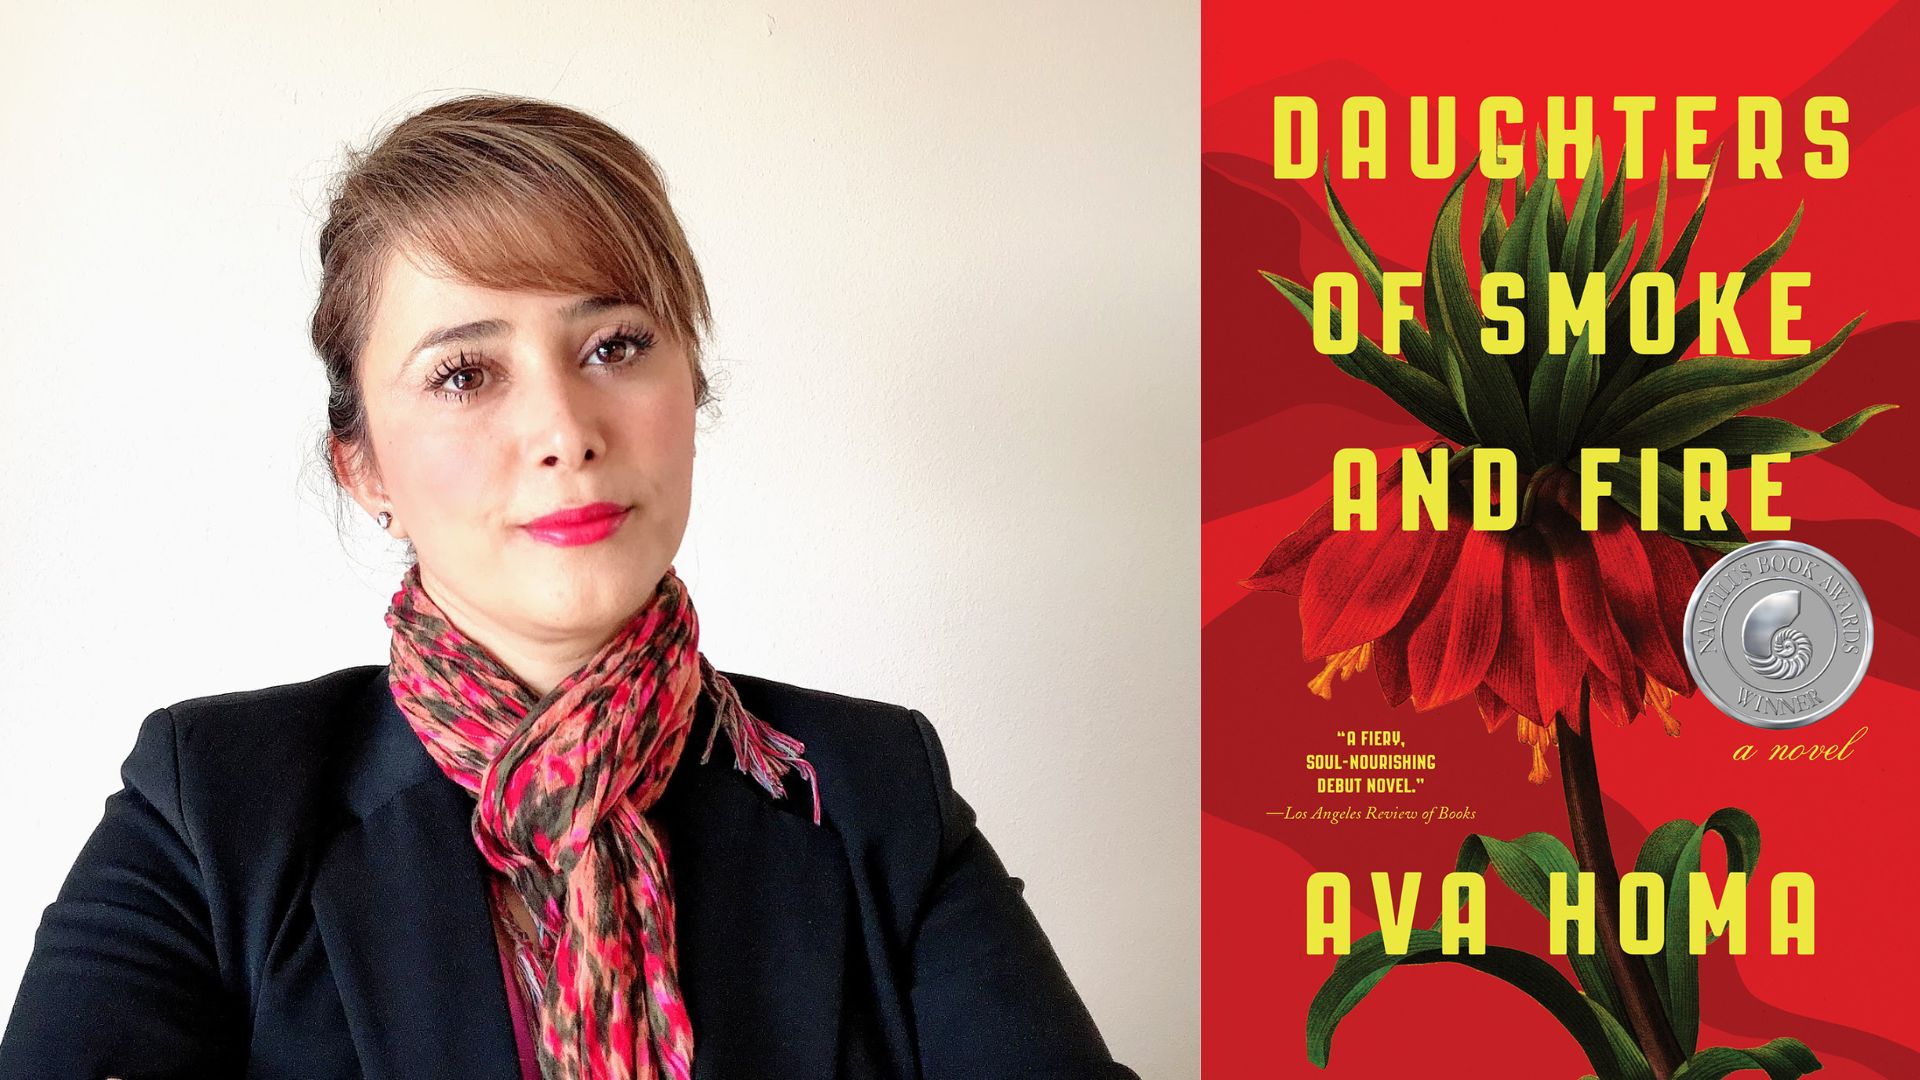 Ava Homa and her book Daughters of Smoke and Fire